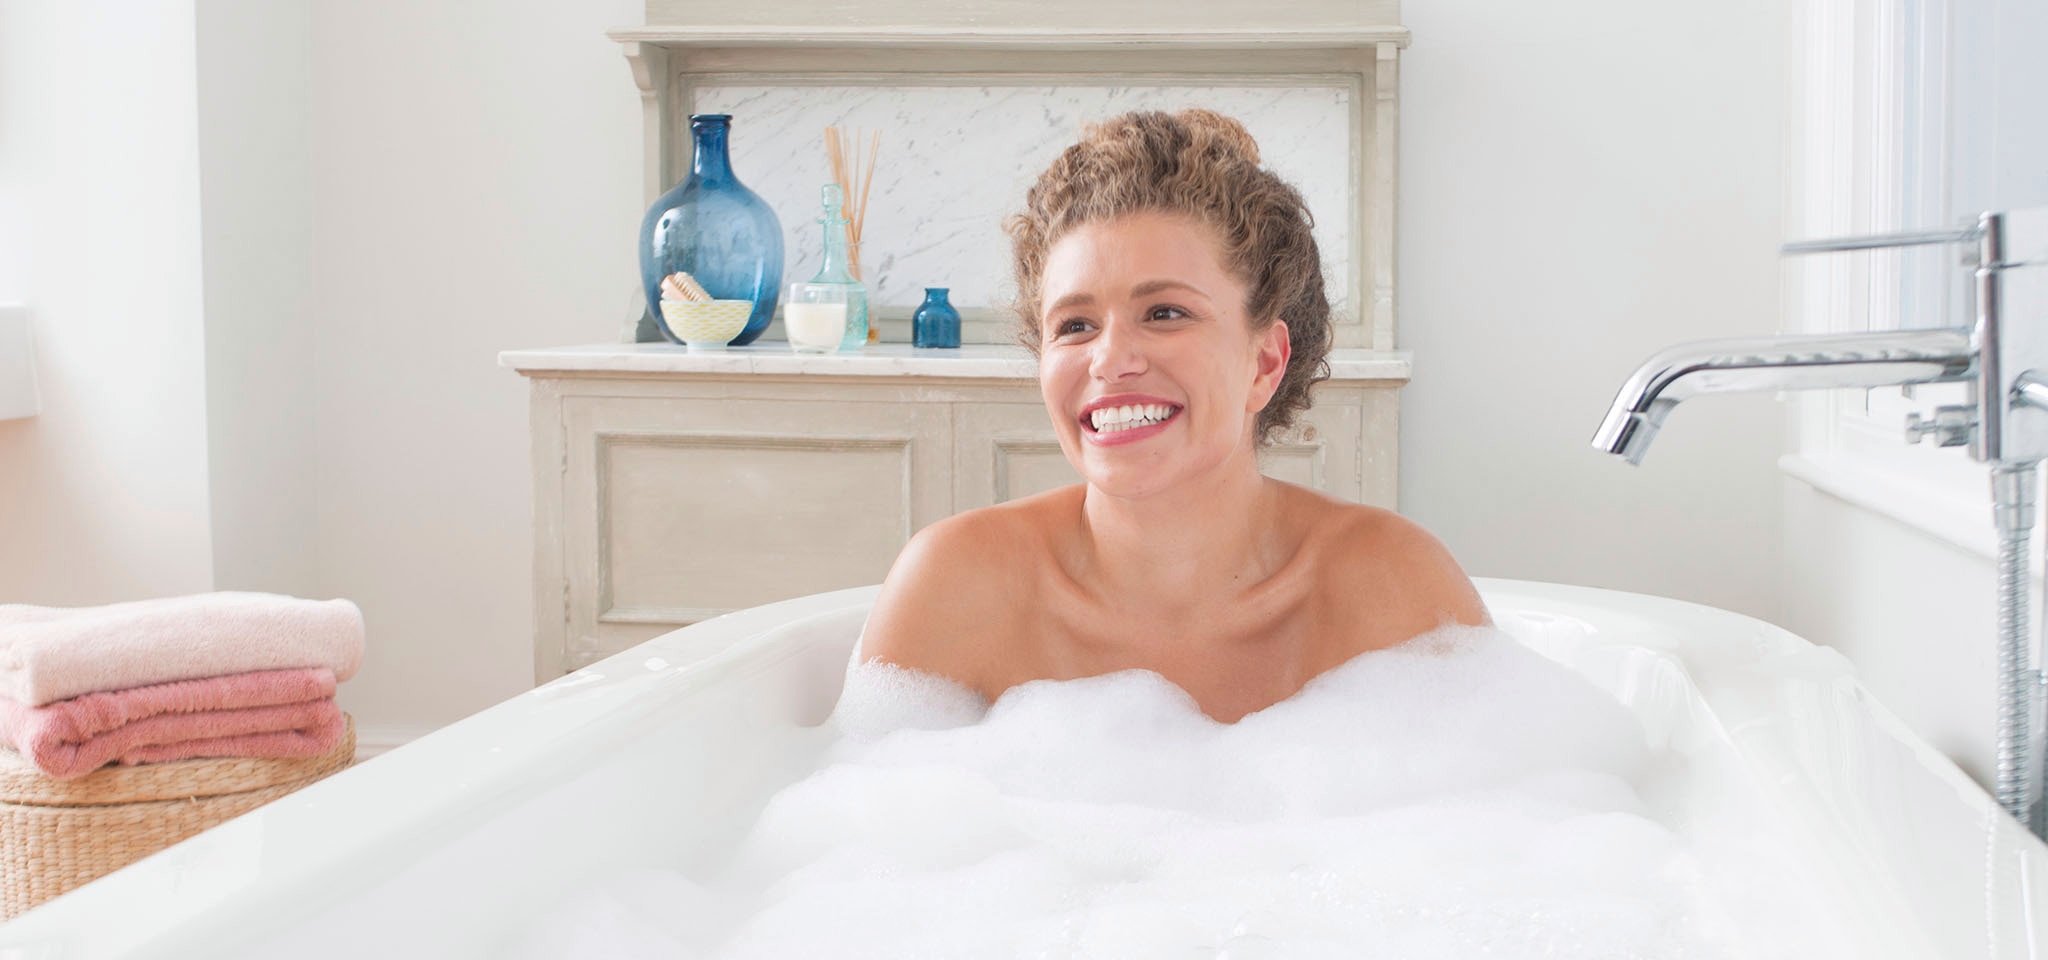 Relaxation techniques: the power of a bath